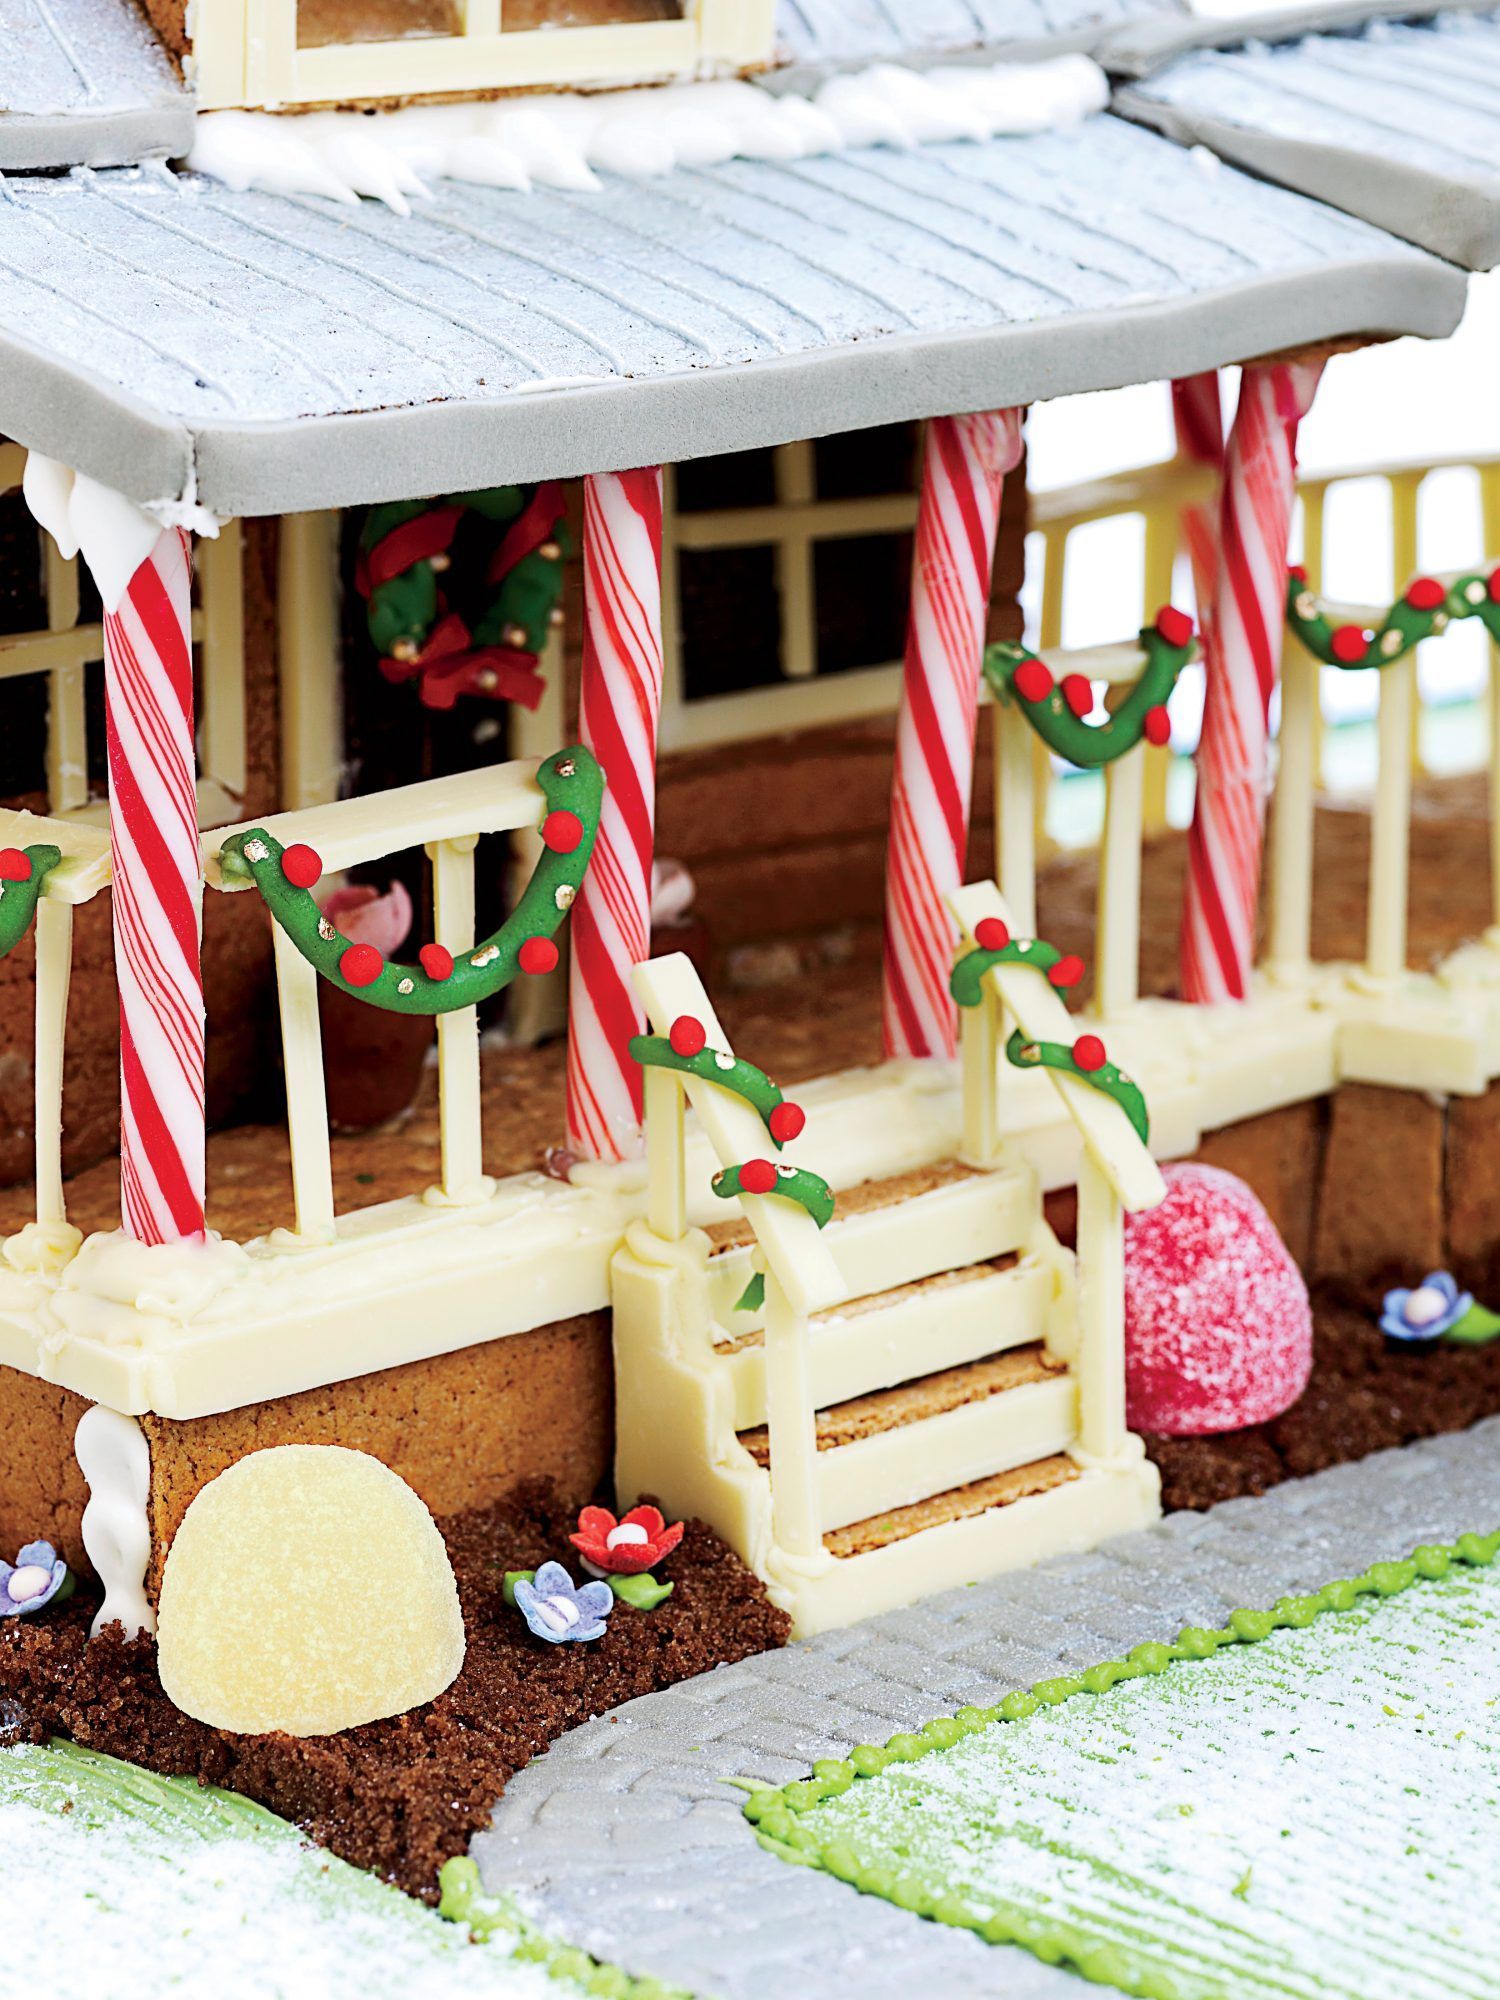 The Ultimate Gingerbread House -   16 gingerbread house designs ideas